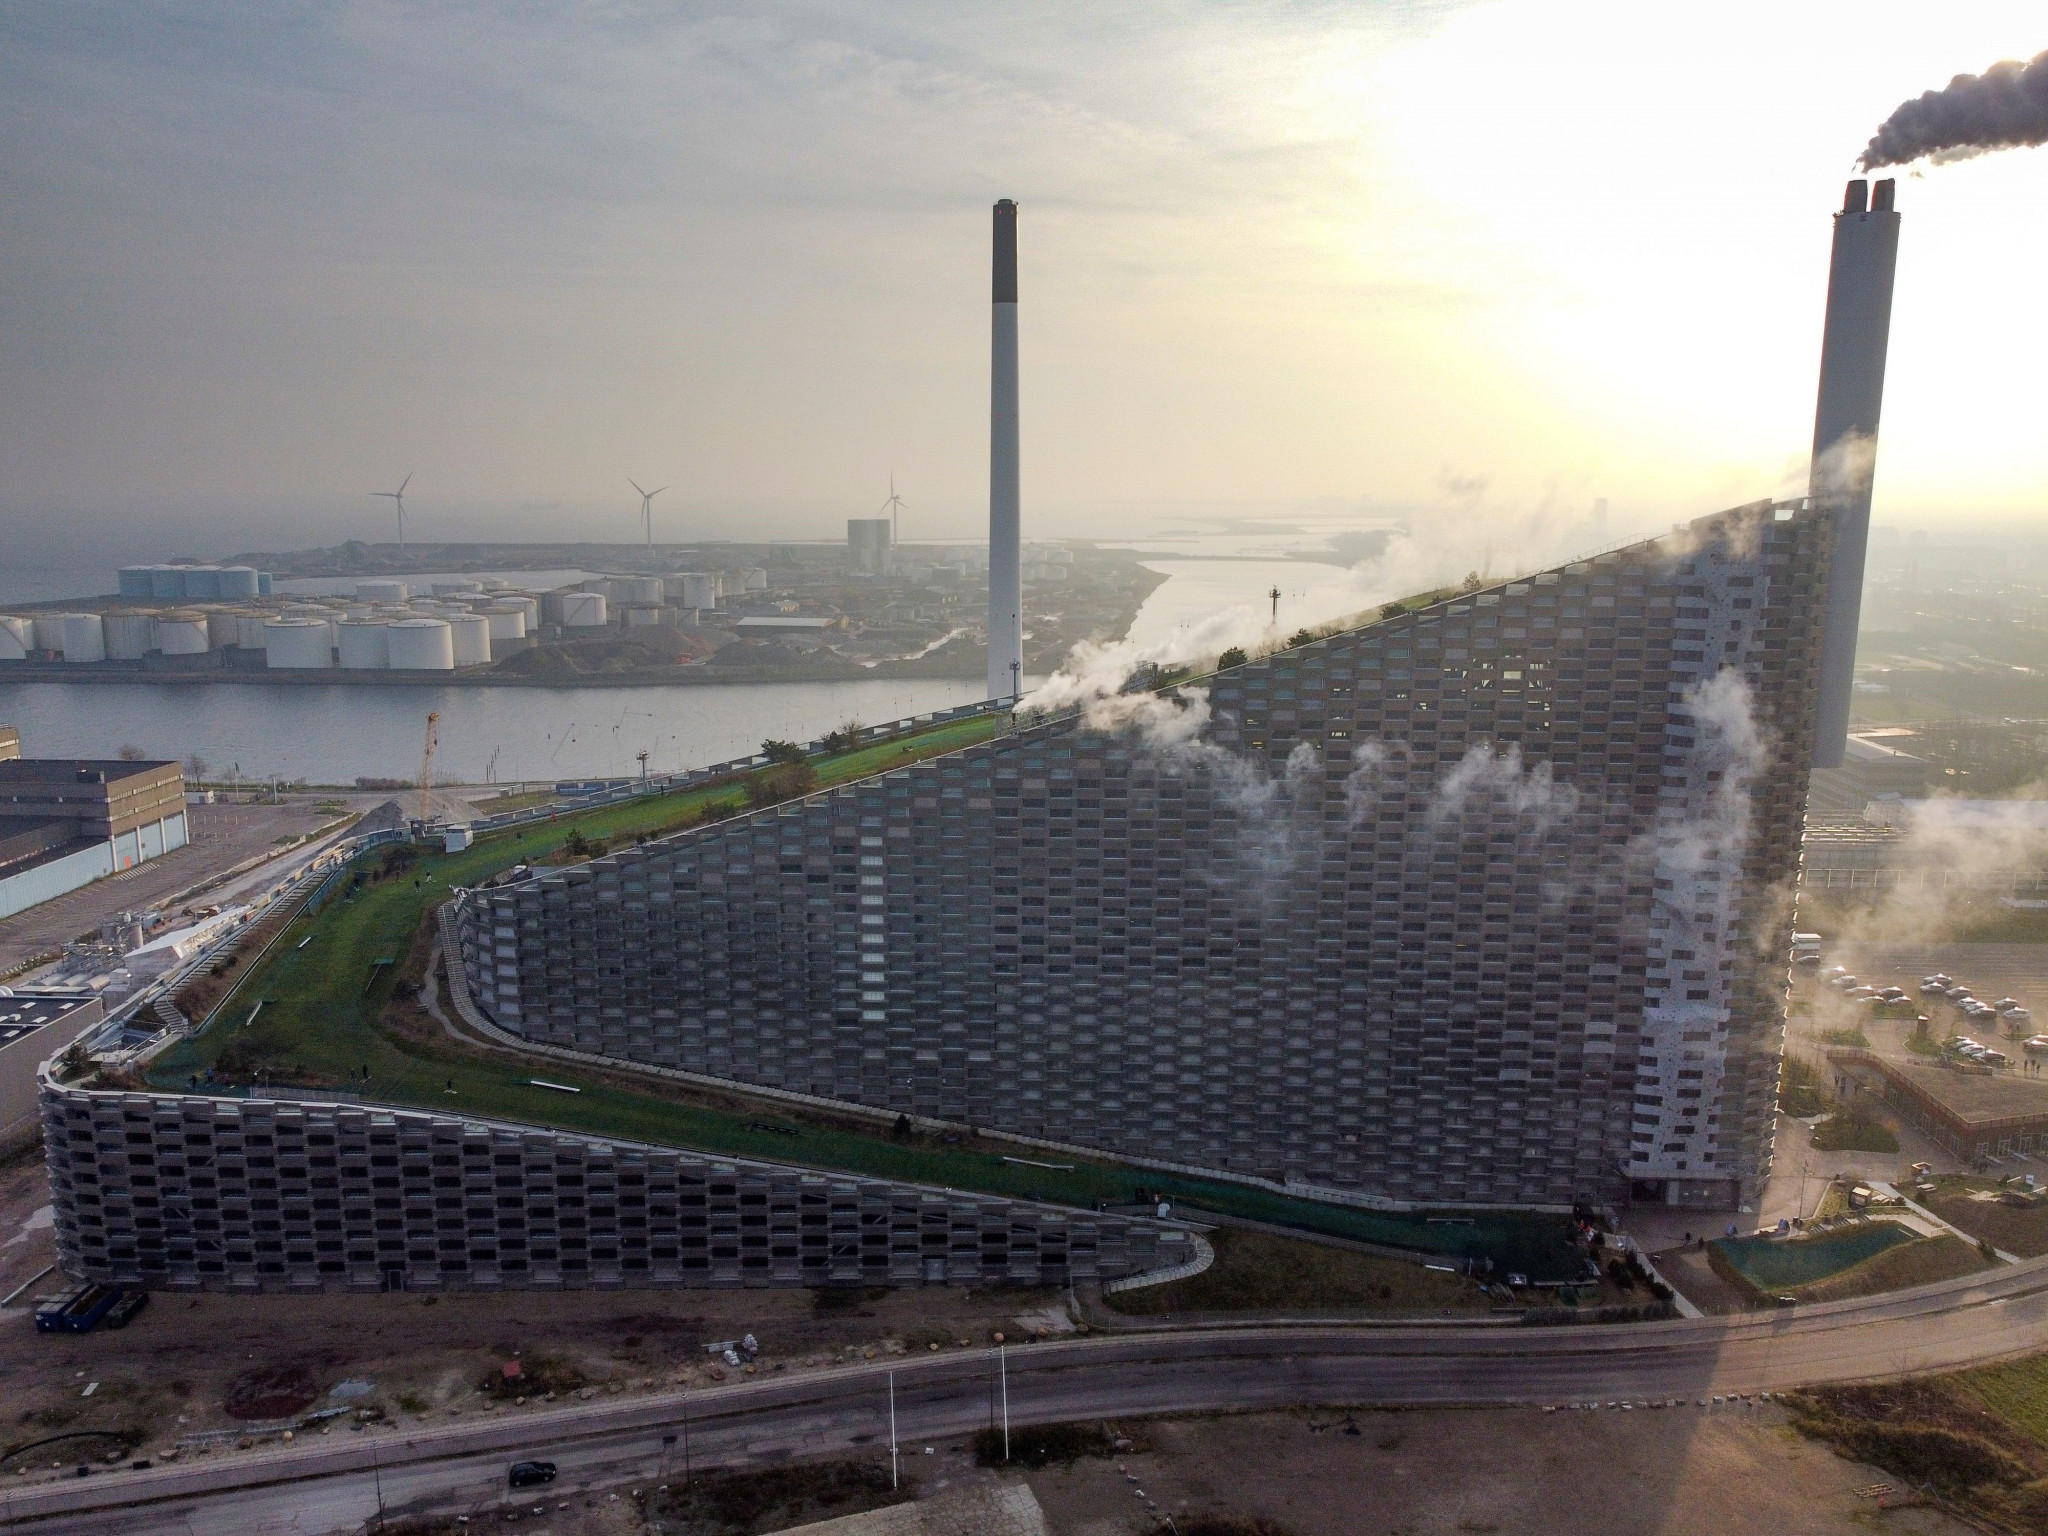 The CopenHill power plant is home to a dry ski slope, hiking trail and climbing wall ©Getty Images